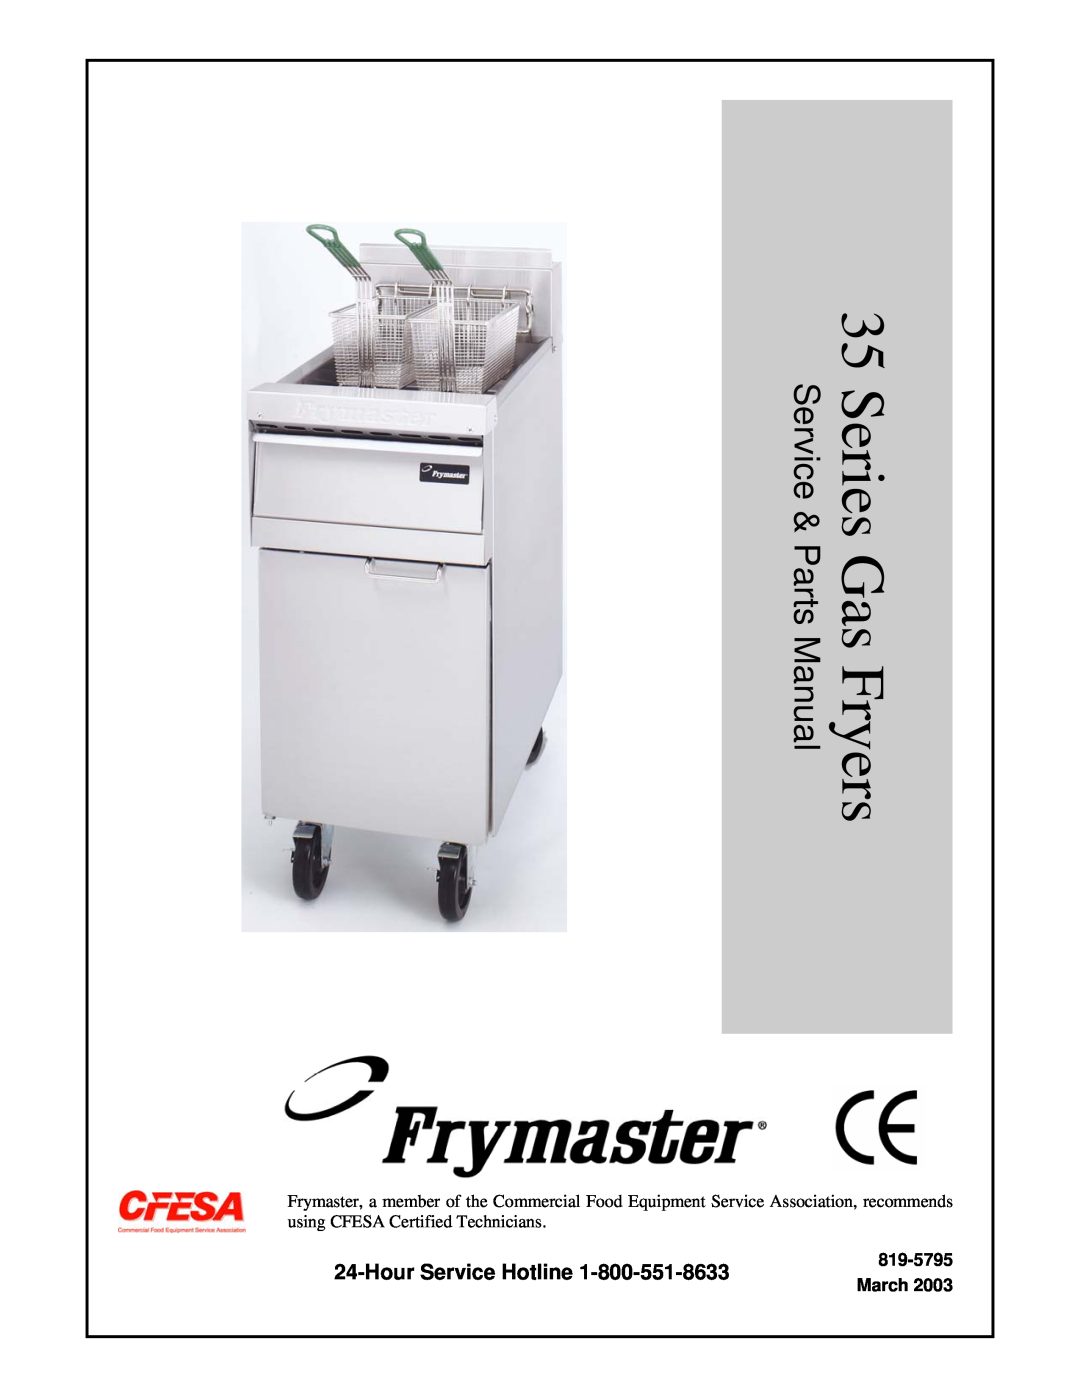 Frymaster 35 Series manual HourService Hotline, Gas Fryers, Parts Manual 